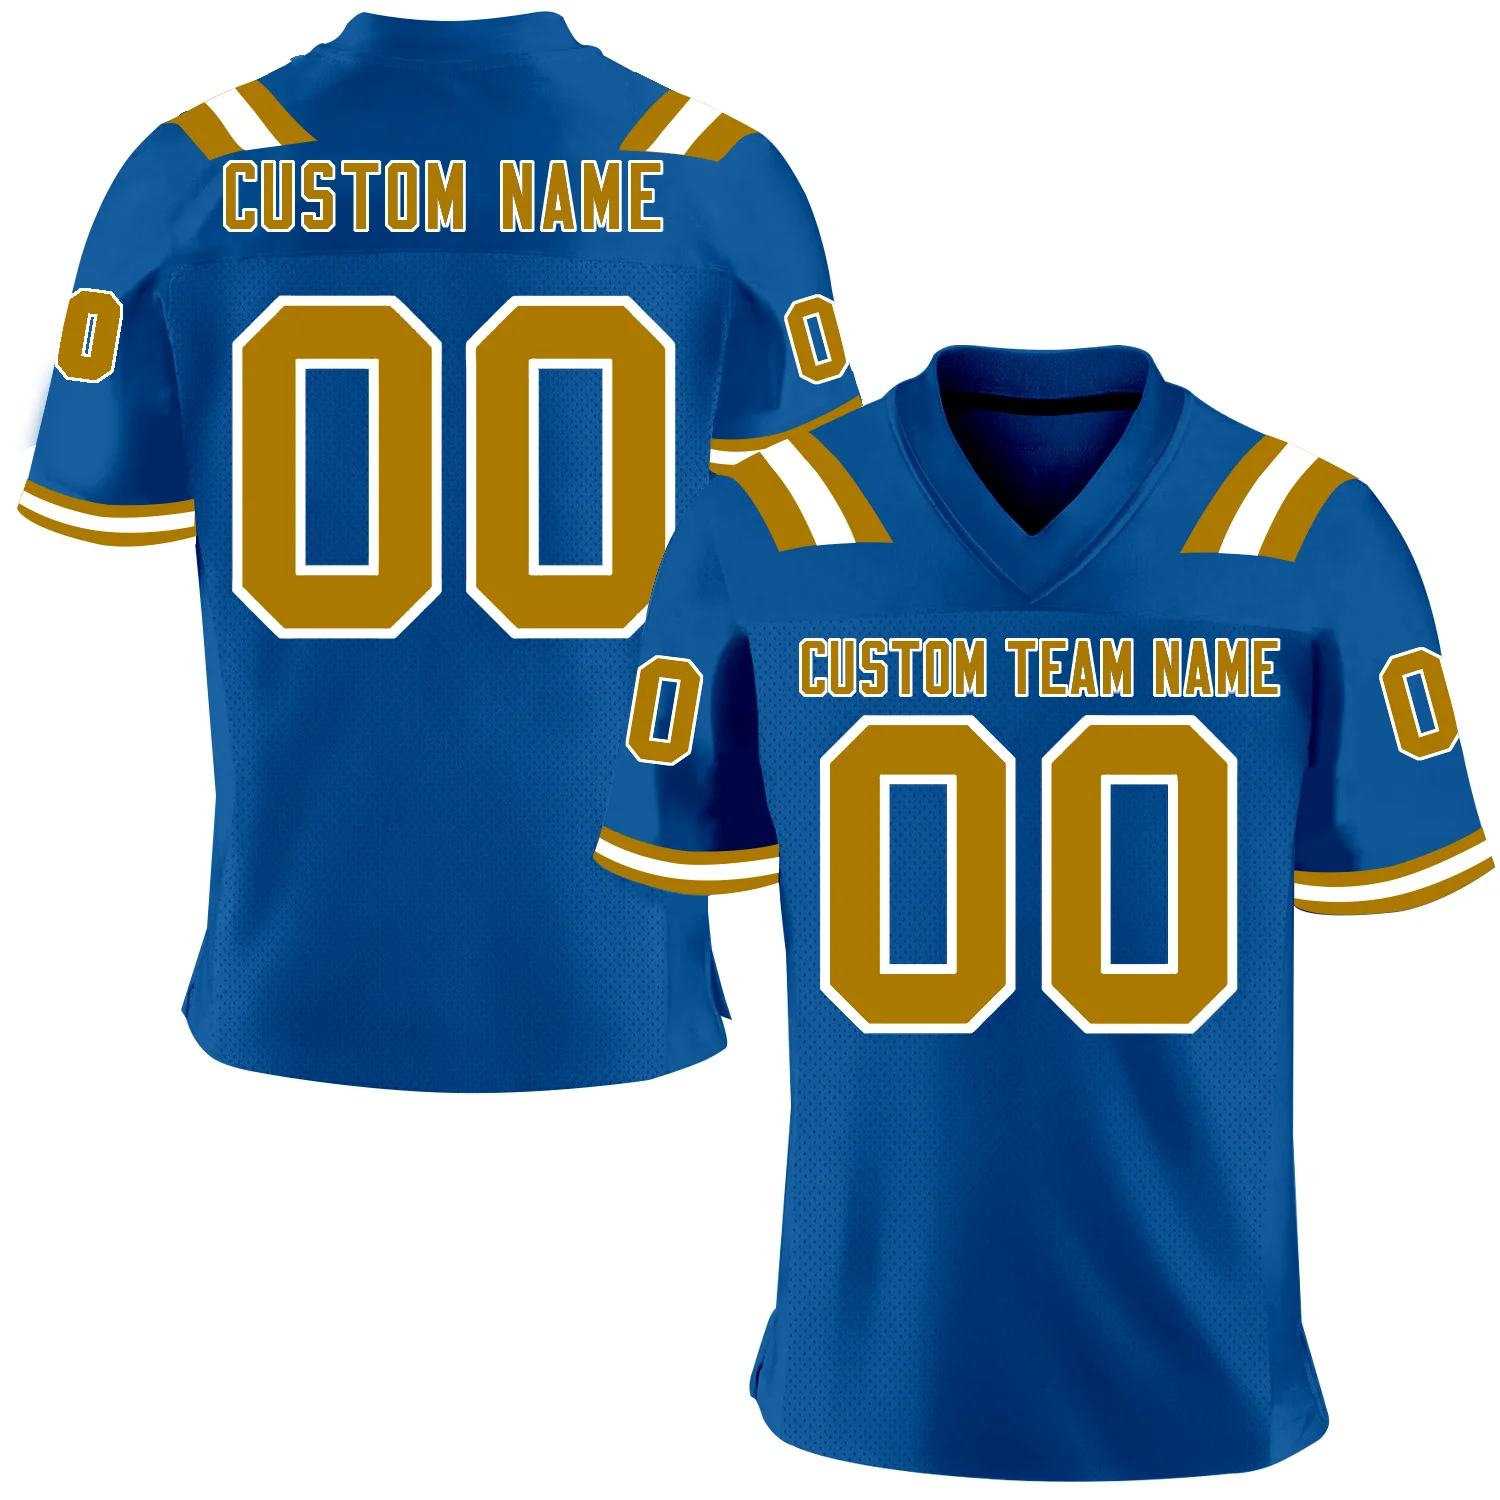 Source Stitched kids youth adult plain custom made American football  practice jersey uniforms wear with pants on m.